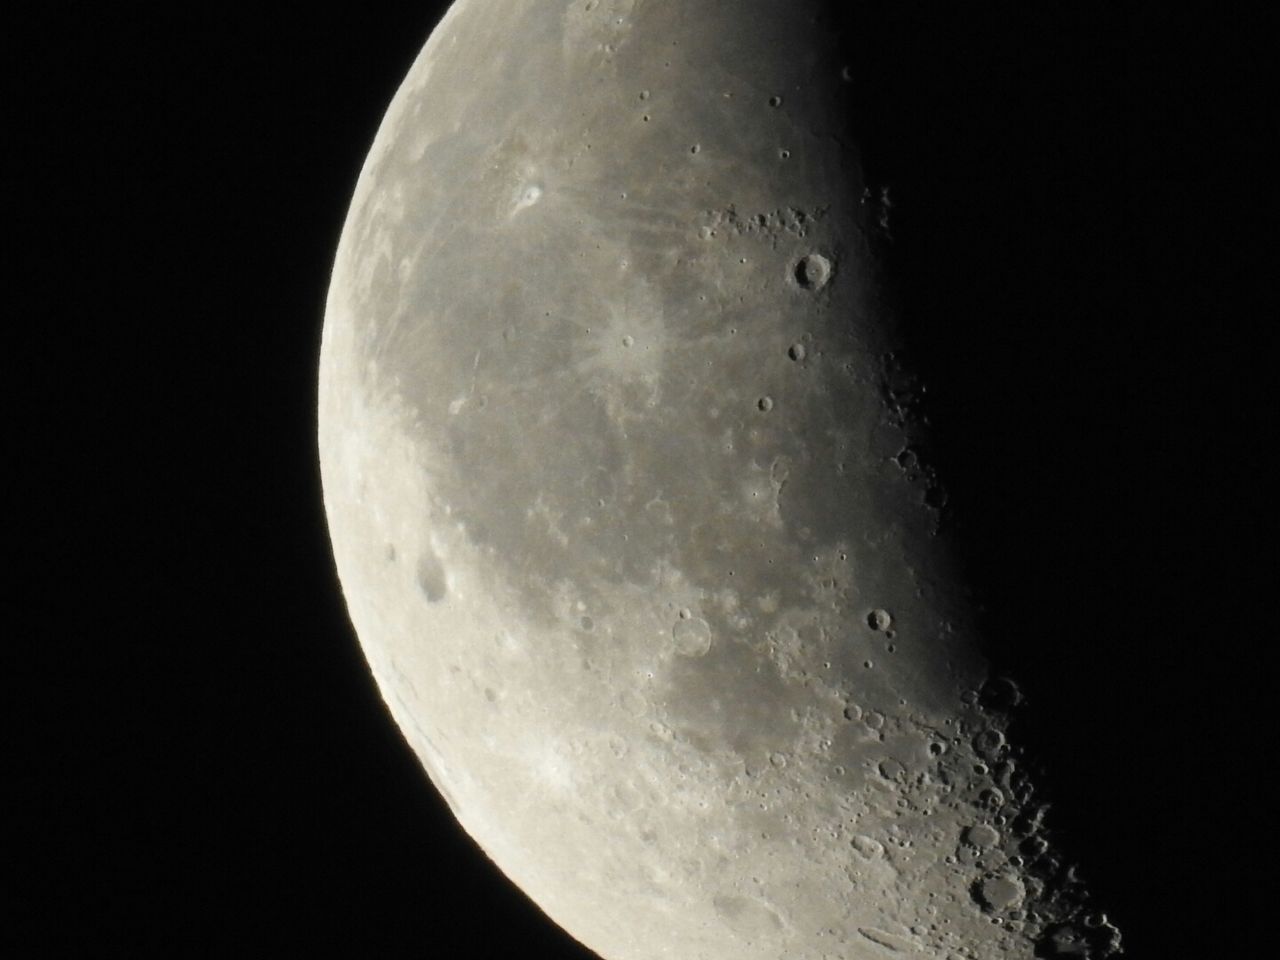 LOW ANGLE VIEW OF MOON IN THE DARK